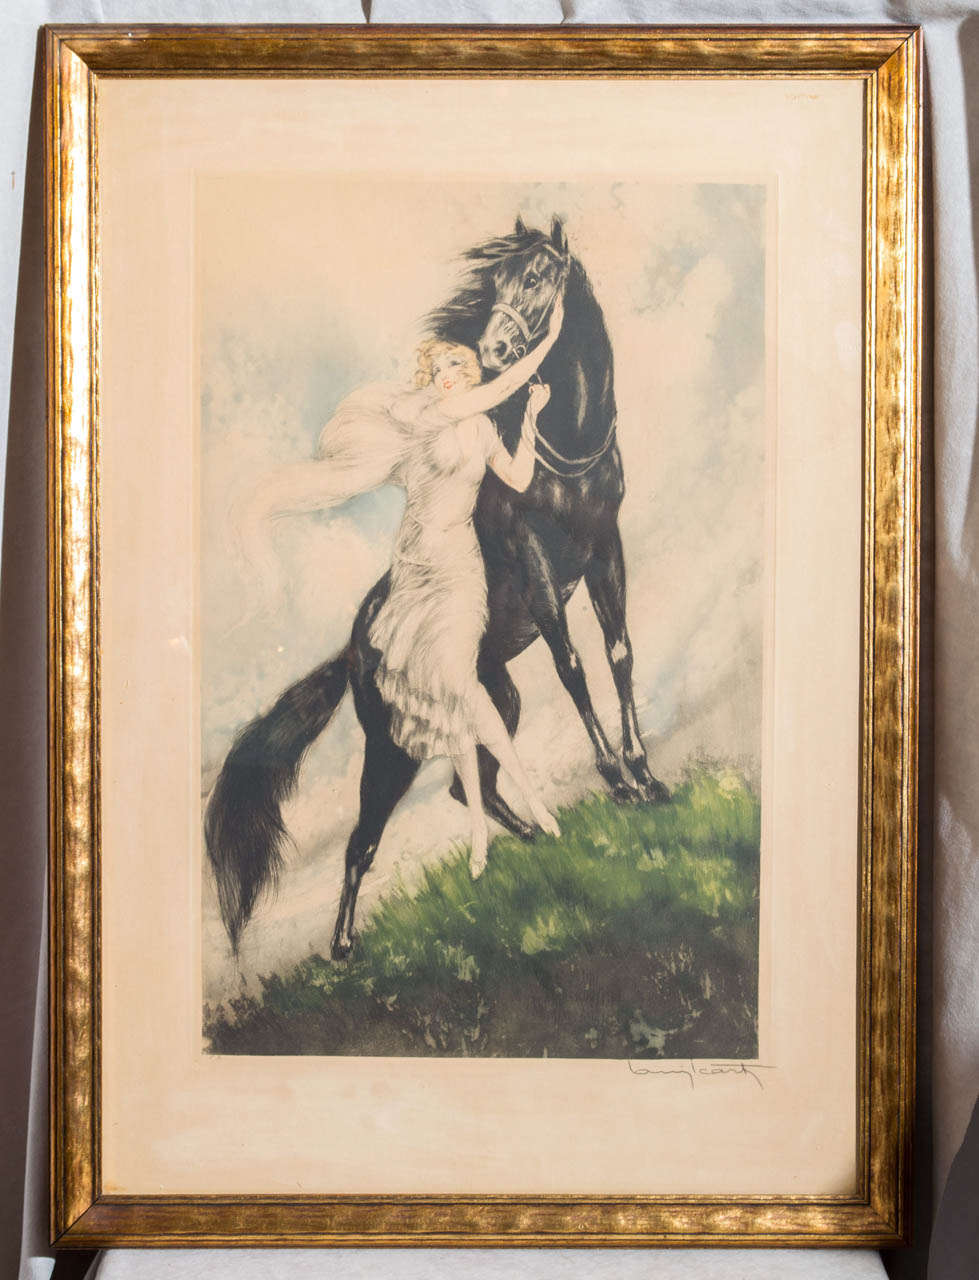 A fairly rare and beautiful etching by the well known artist, Louis Icart.  This example sells for quite stiff prices at auction.  We have seen prices as much as $8,900; quite often this etching brings in the $4,000 range.  We are really offering